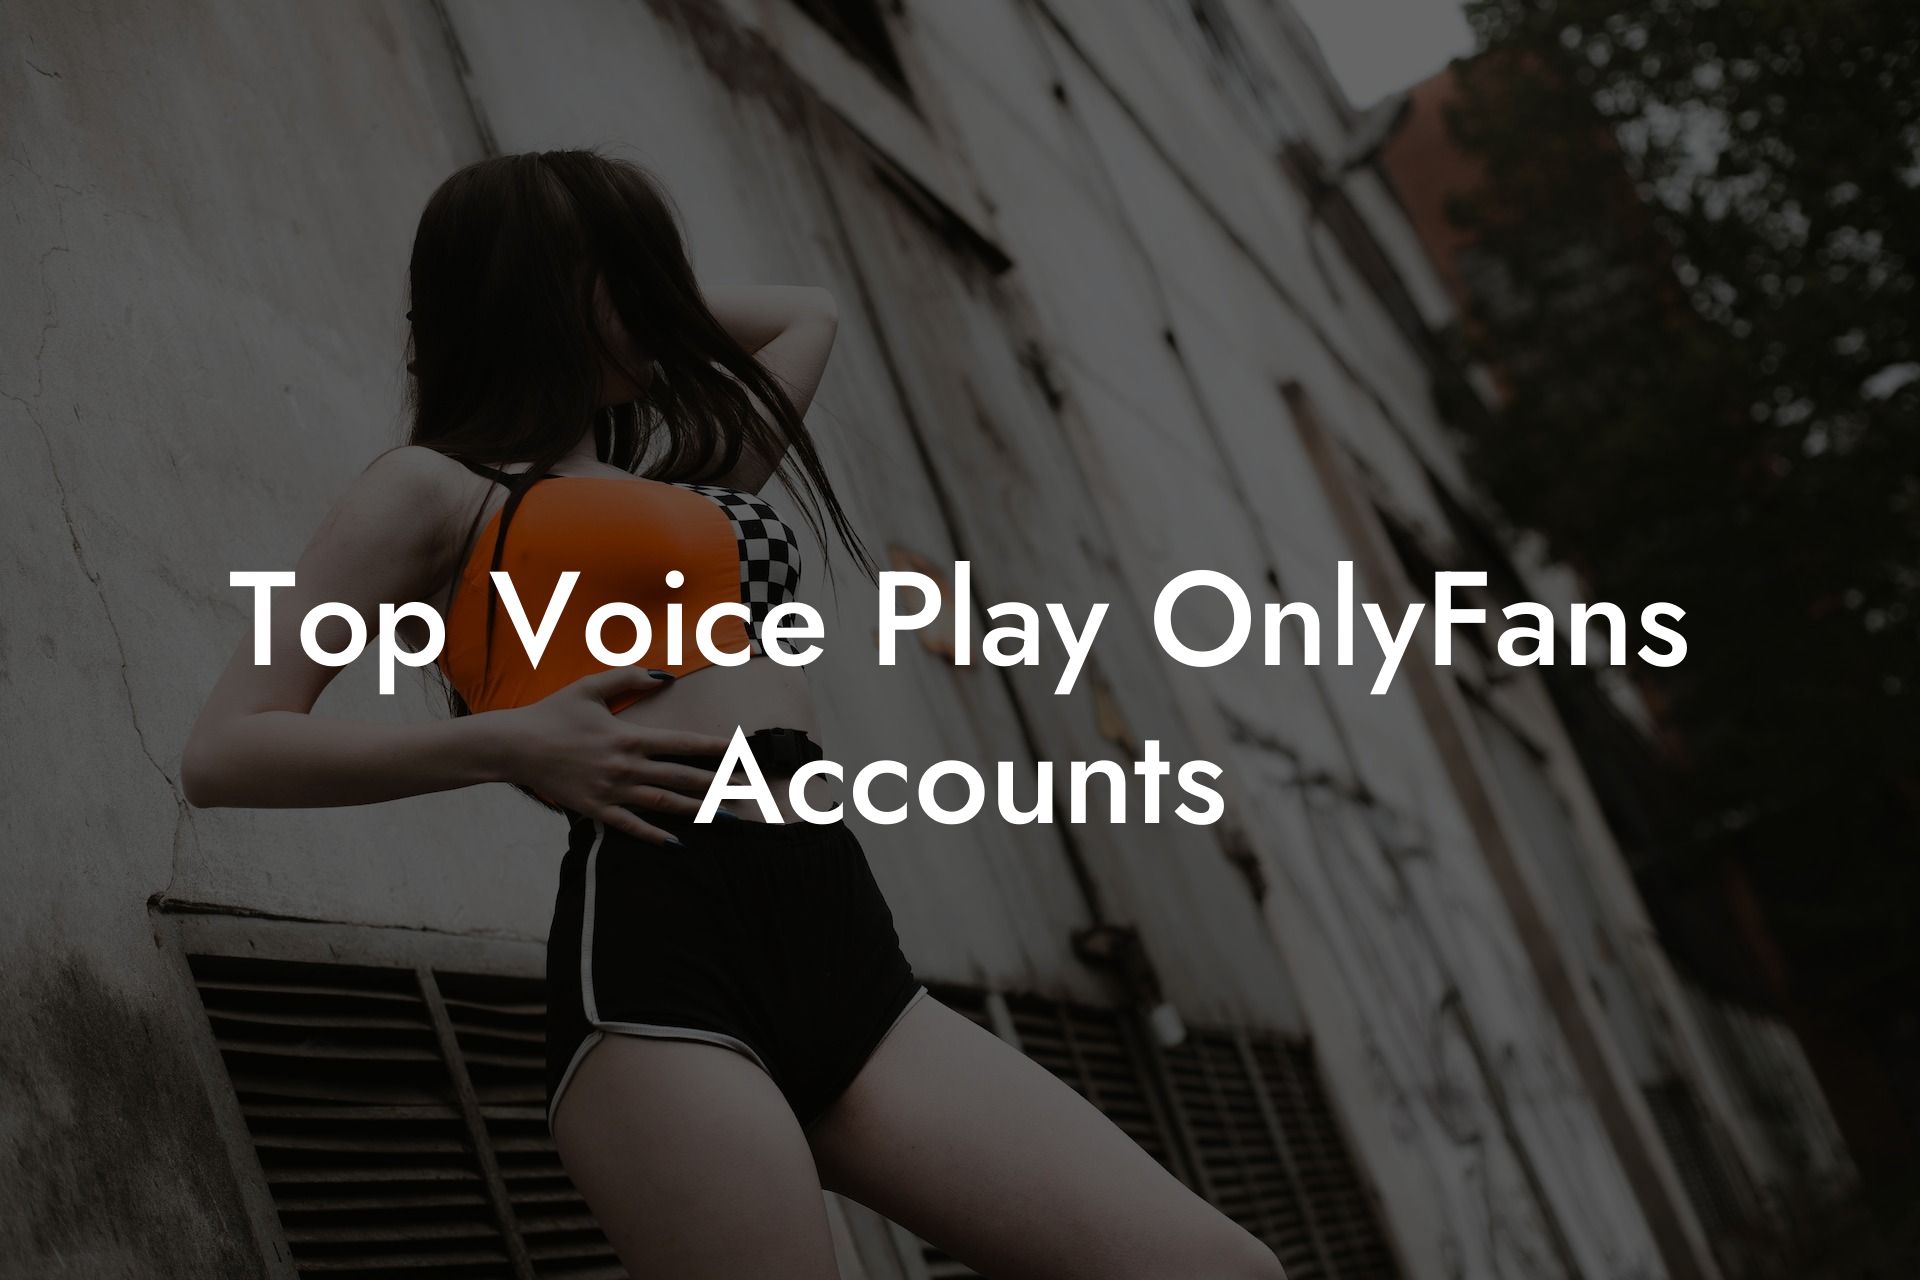 Top Voice Play OnlyFans Accounts